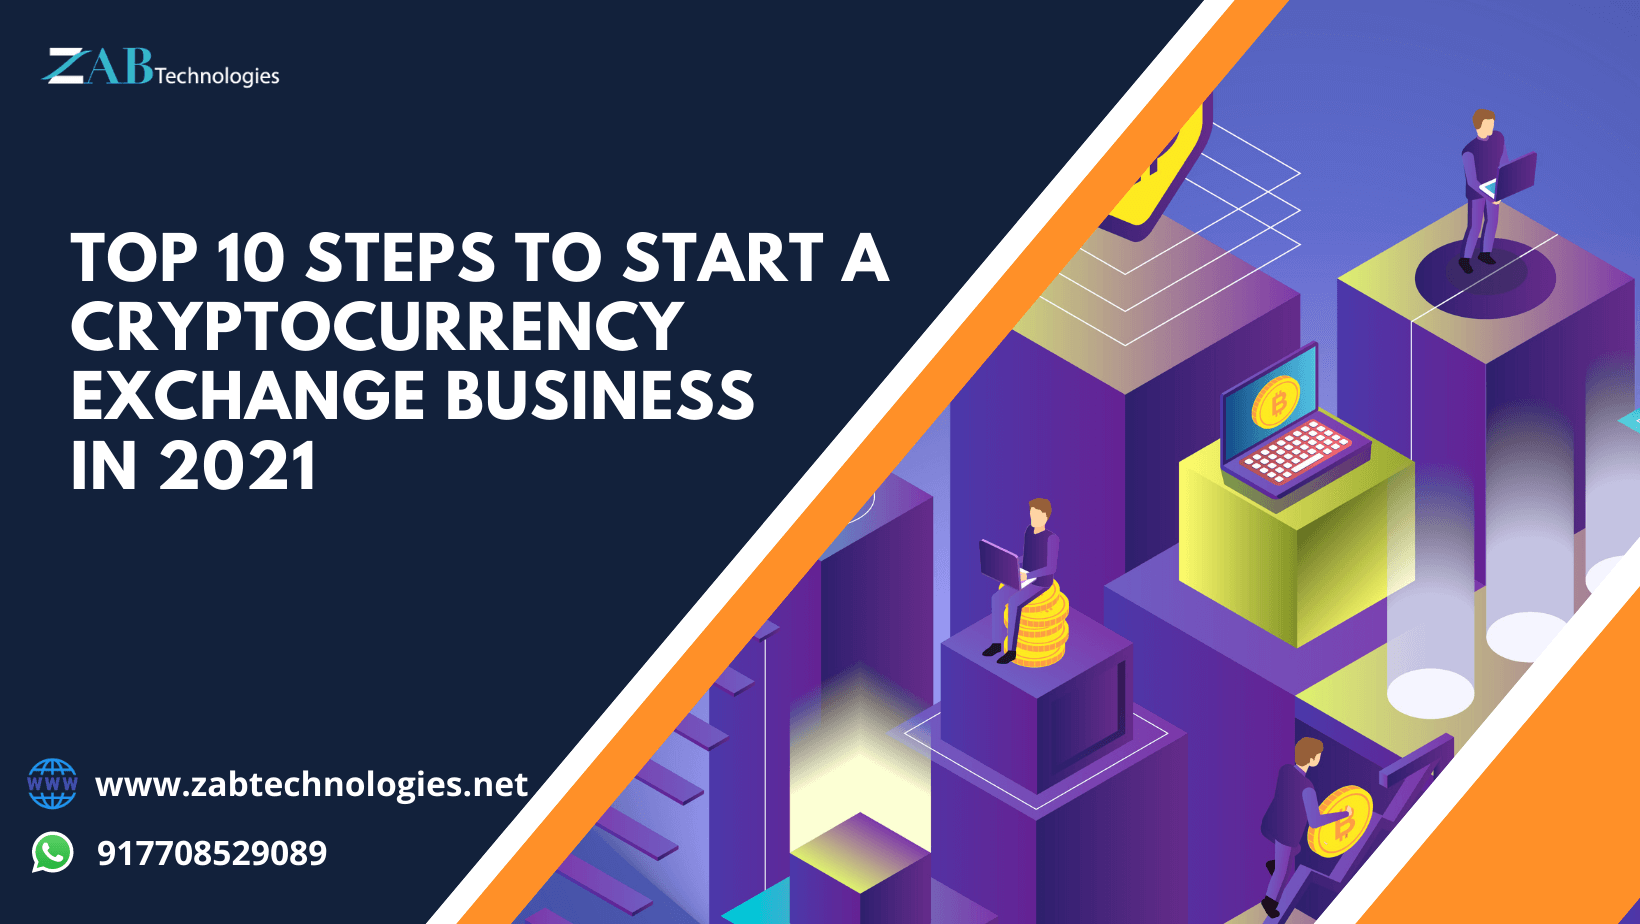 Start a Cryptocurrency Exchange Business - 10 Instant Steps